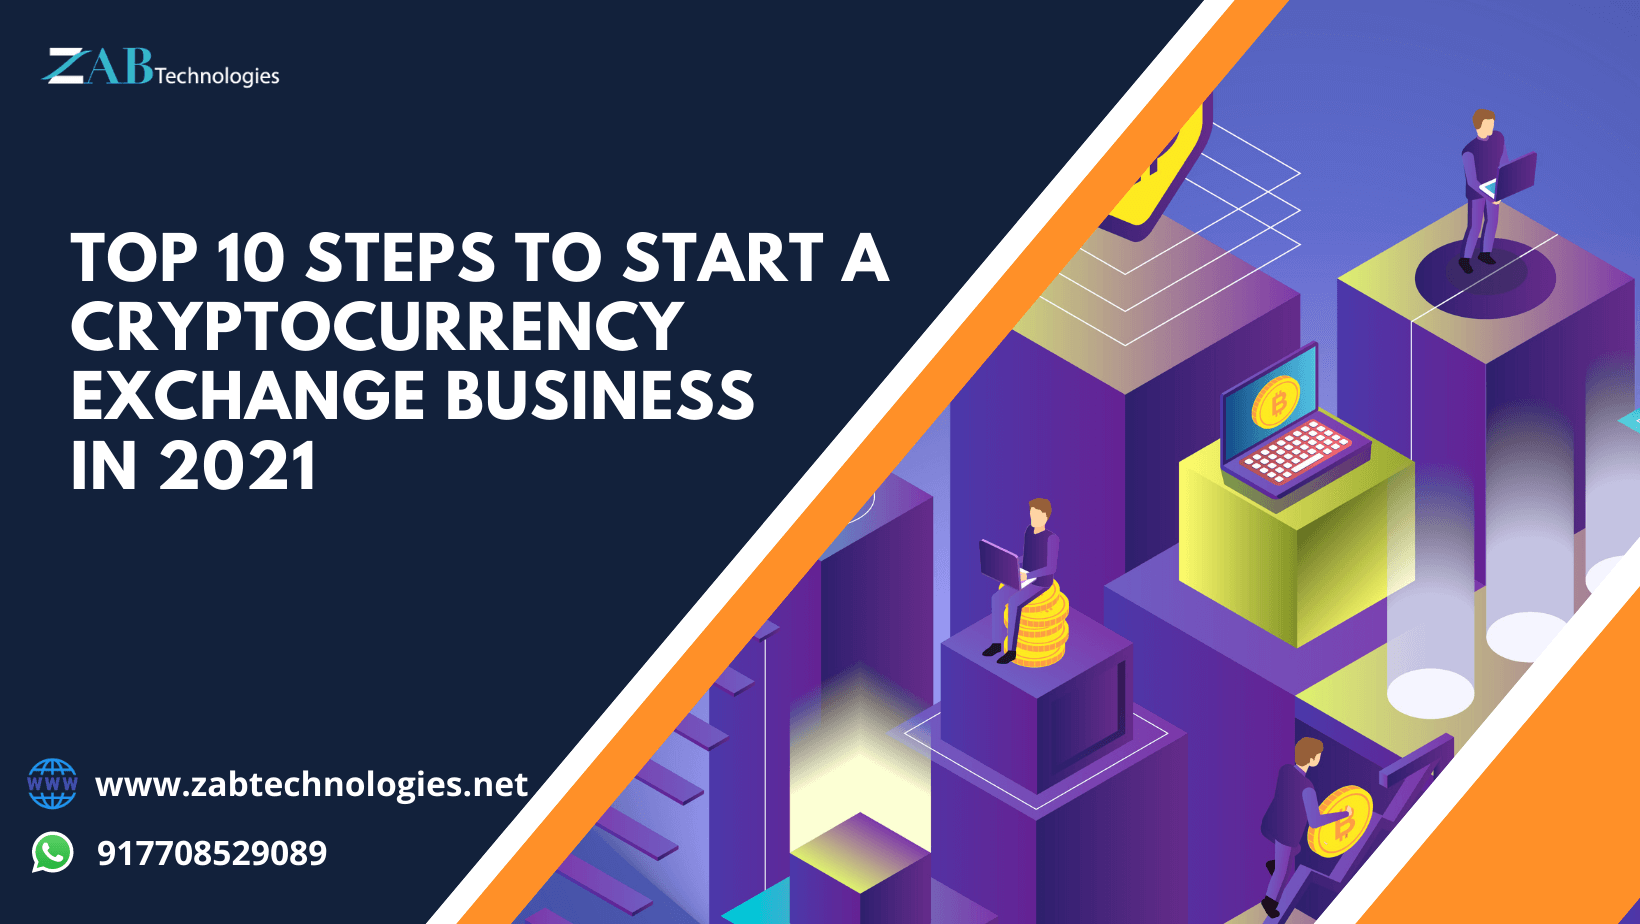 Start a Cryptocurrency Exchange Business - 10 Instant Steps